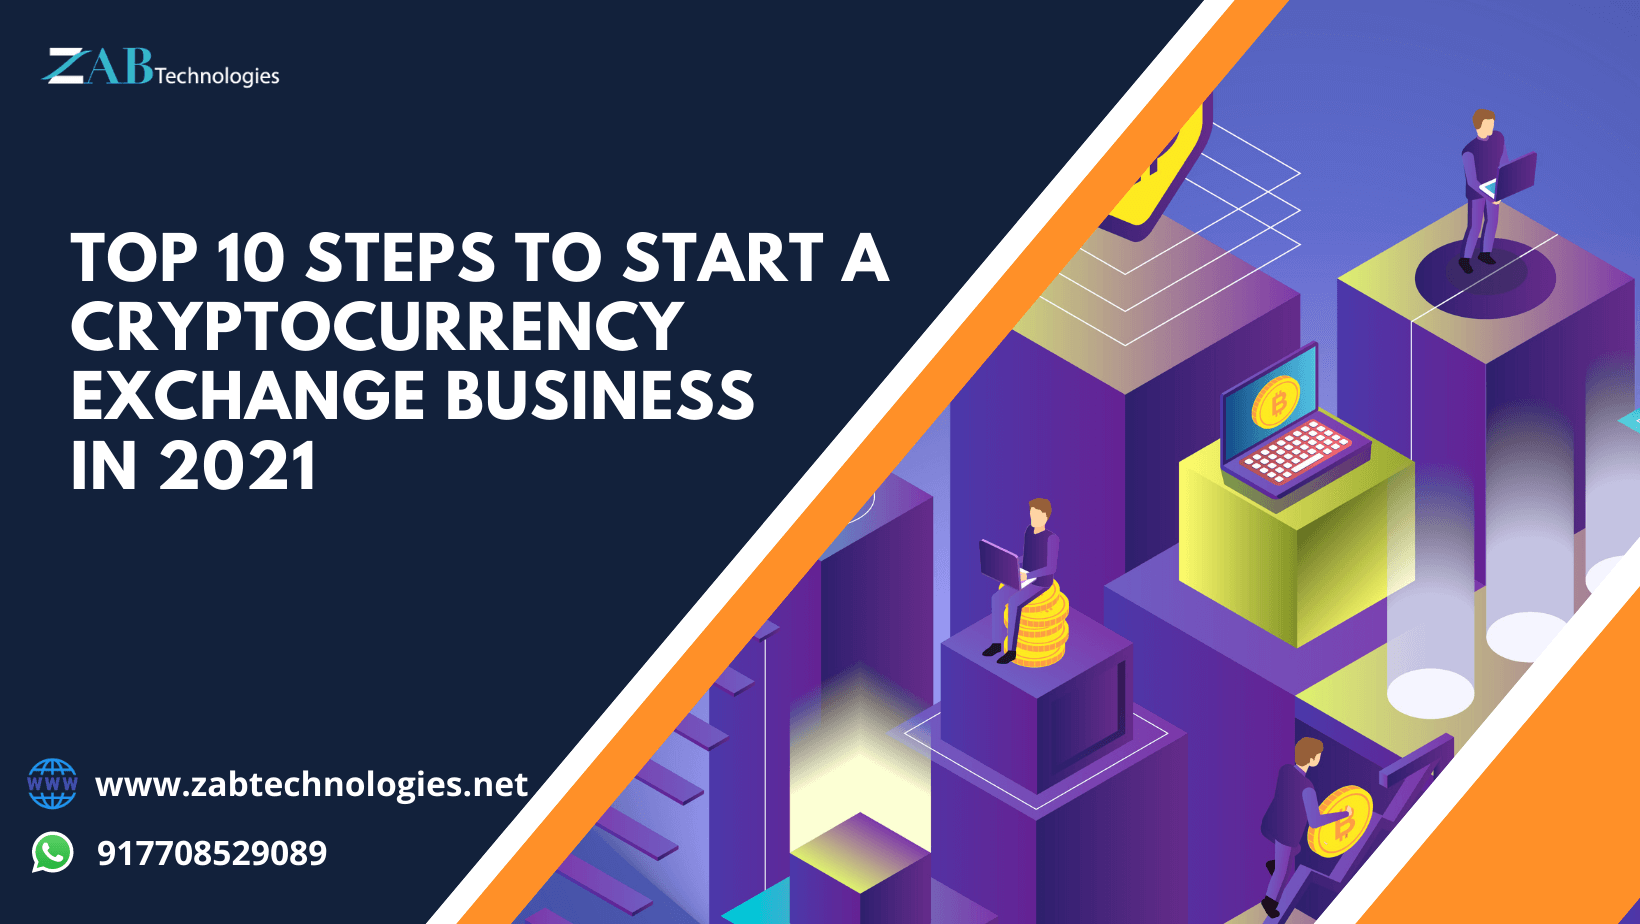 Start a Cryptocurrency Exchange Business - 10 Instant Steps